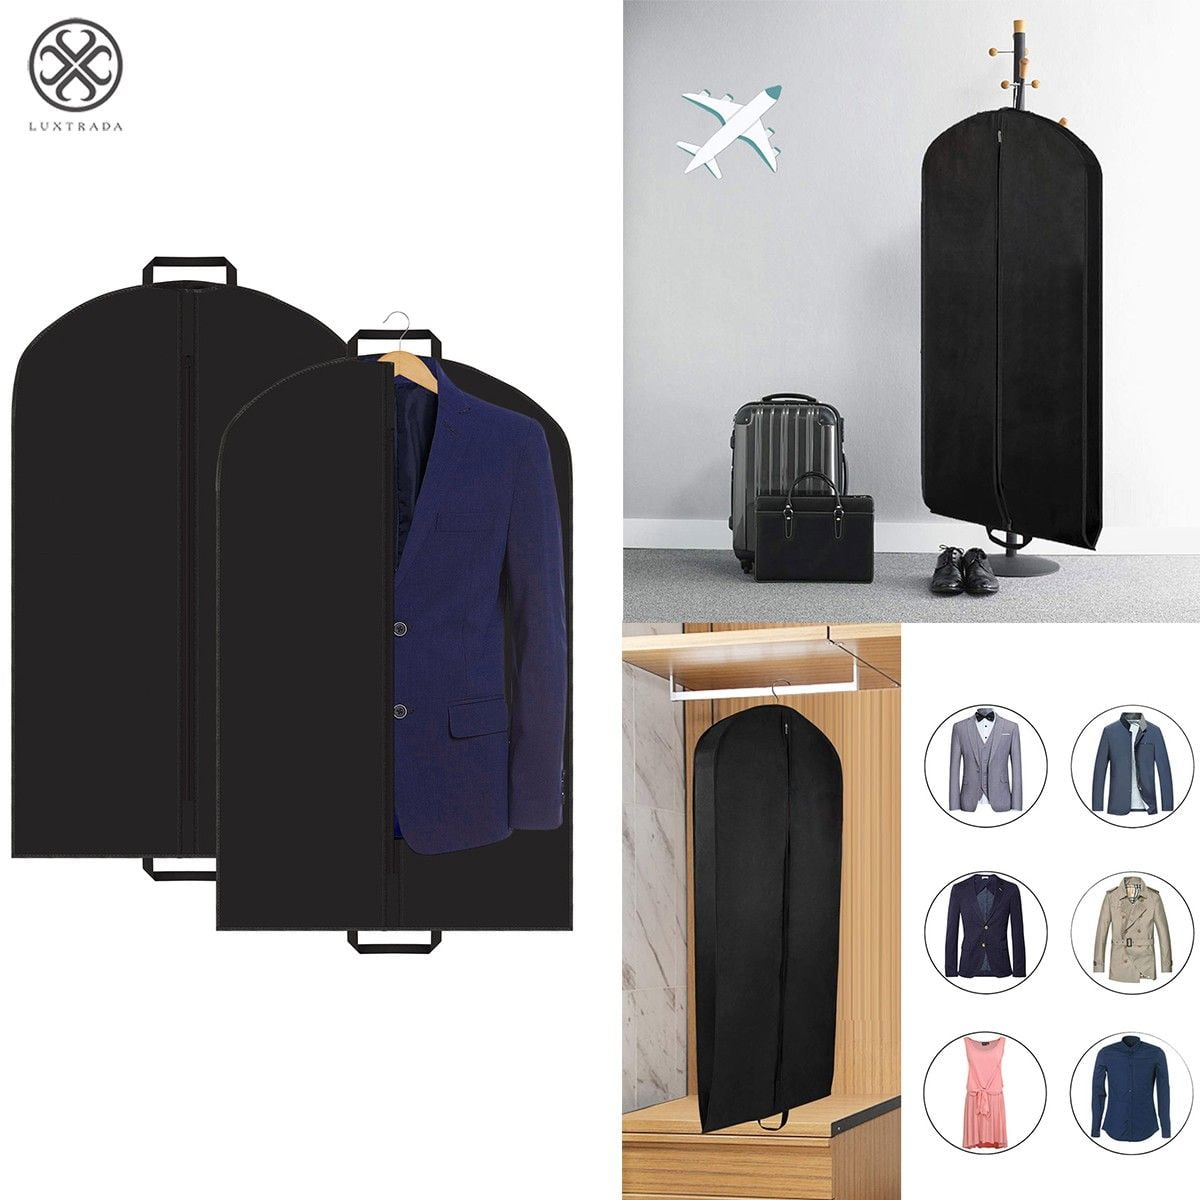 SUIT CARE BAG HANGING CLOTHES PROTECTION TRAVEL CARRIER ZIP UP GARMENT COVER 